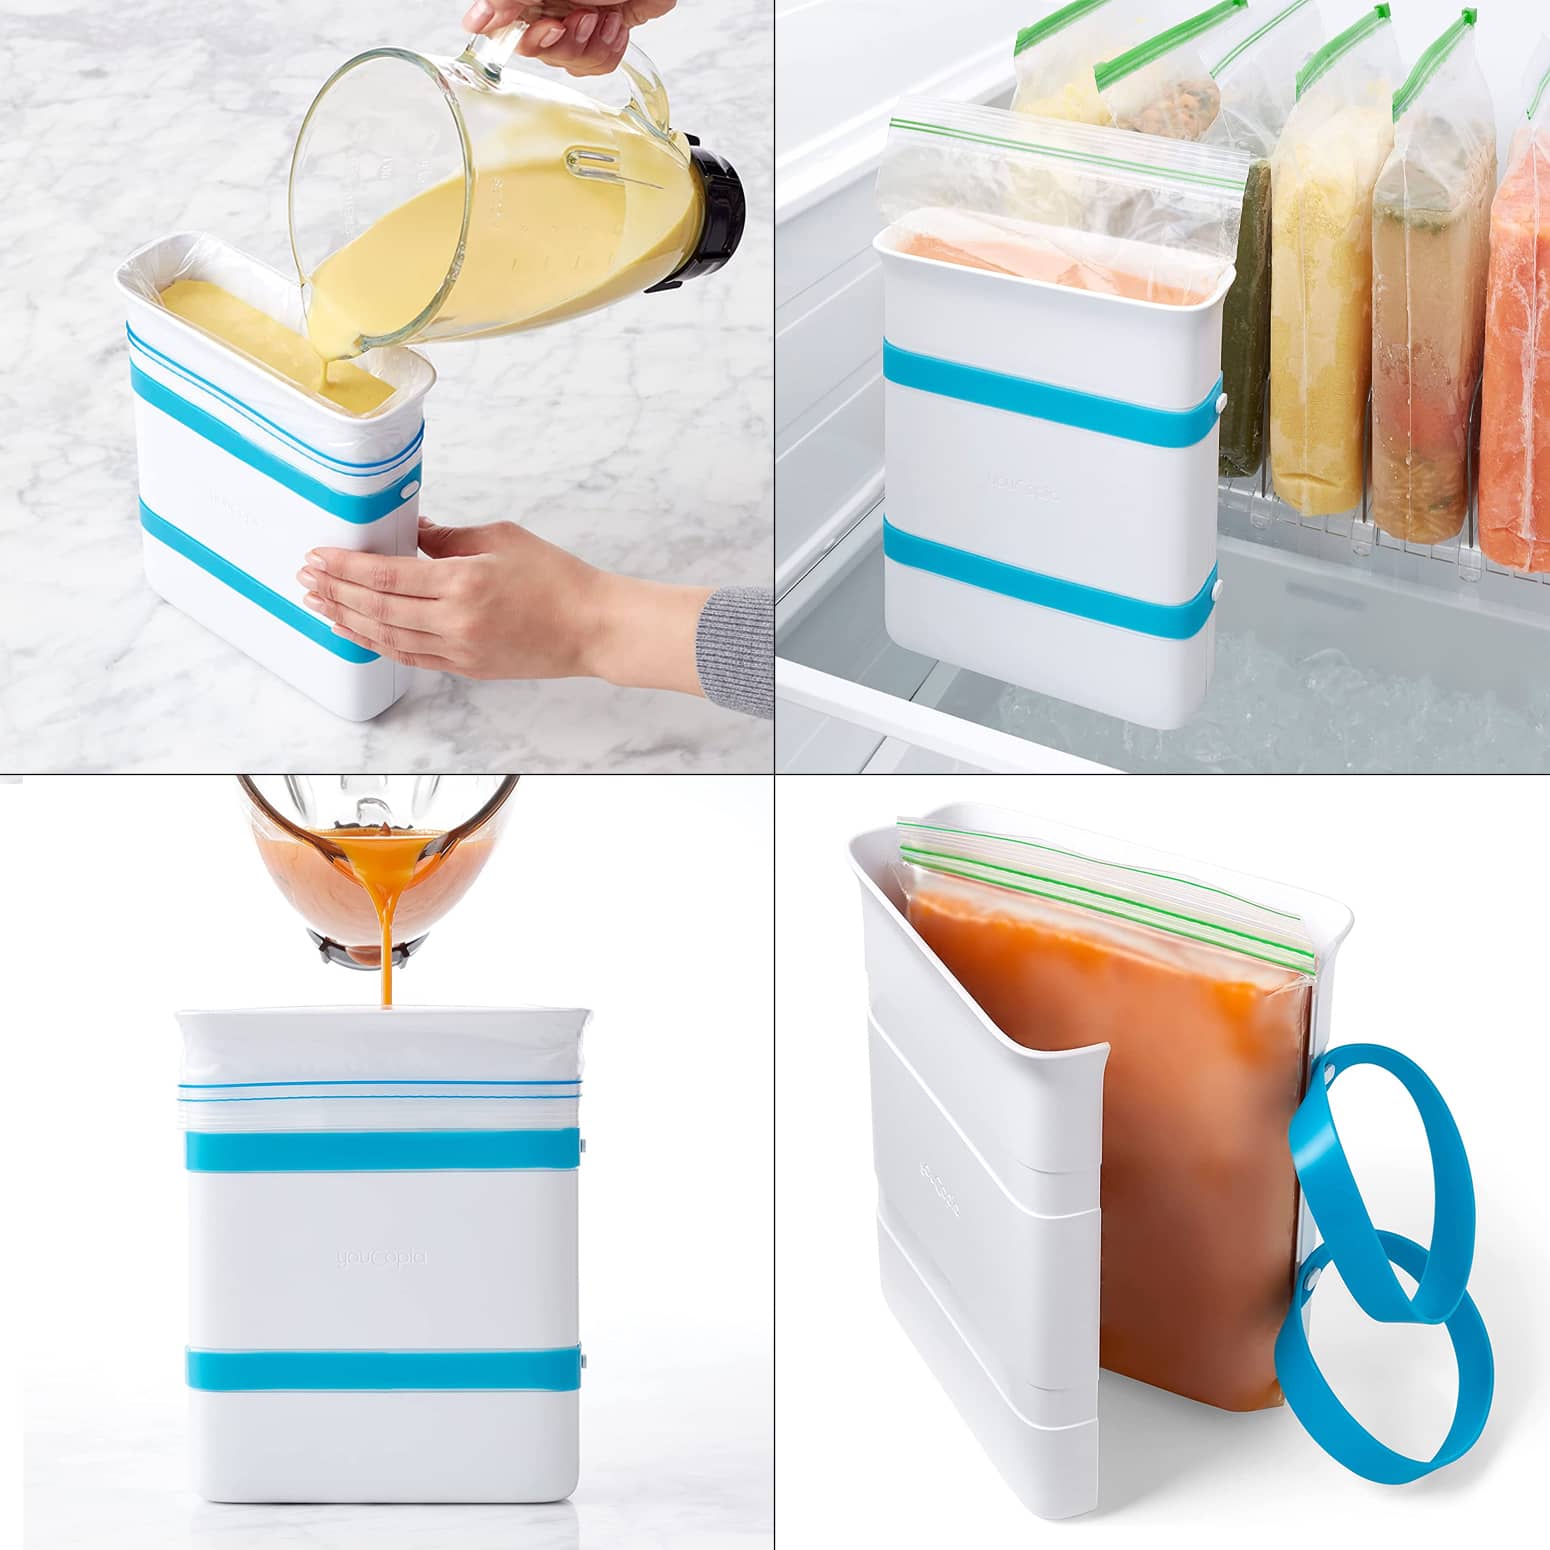 FreezeUp Food Block Maker - Freeze Soups and Leftovers Into Tidy, Compact Blocks